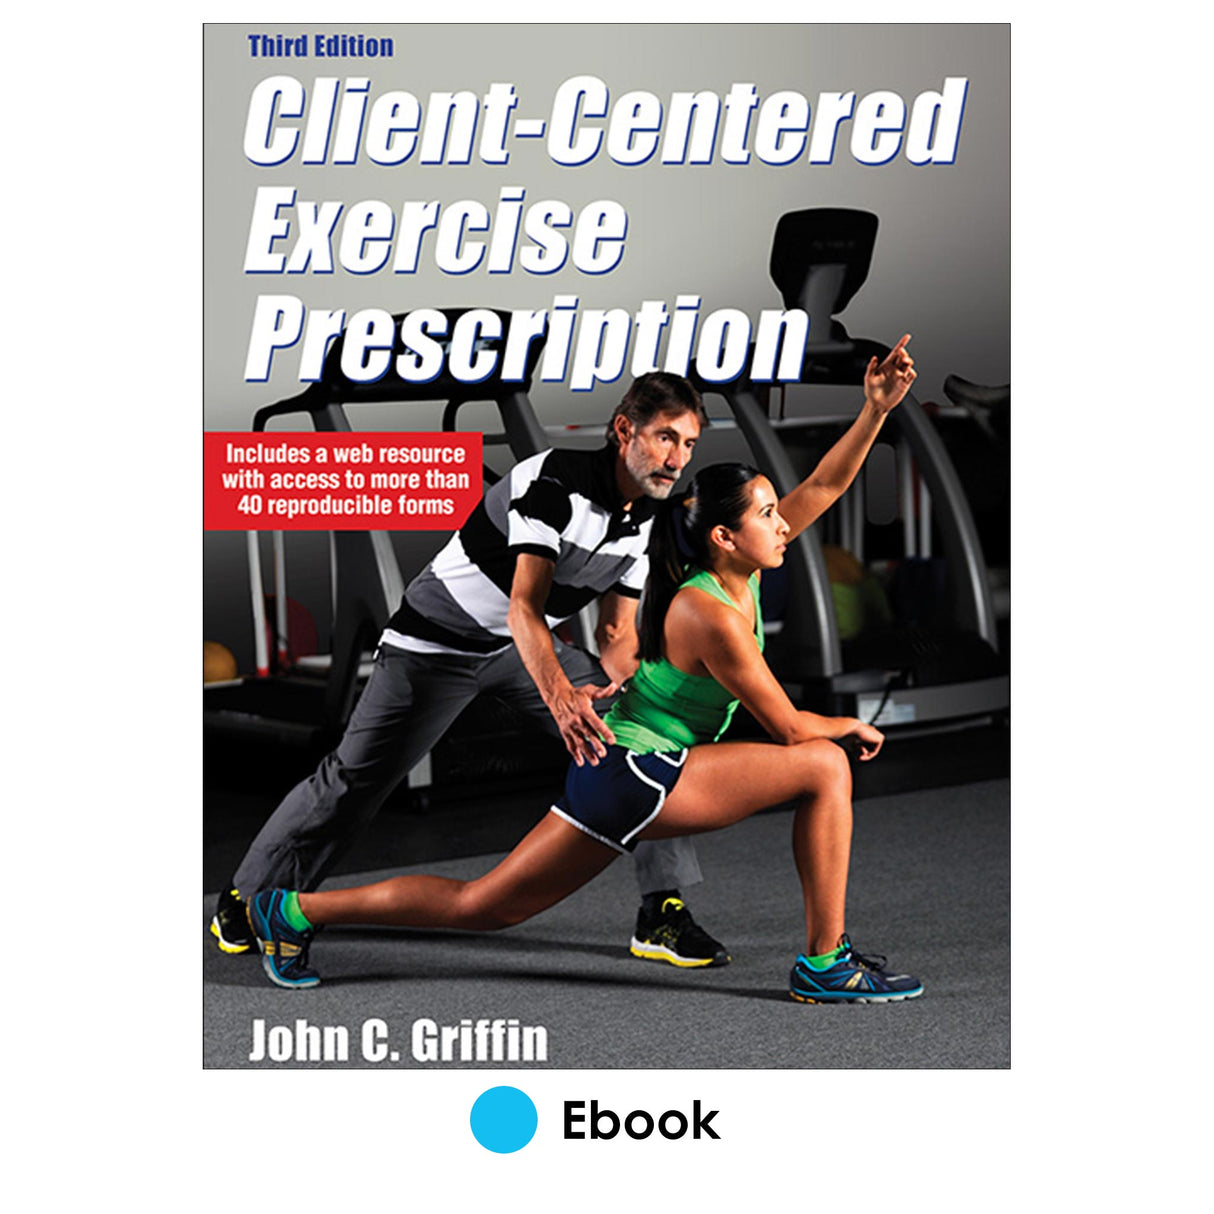 Client-Centered Exercise Prescription 3rd Edition PDF With Web Resource